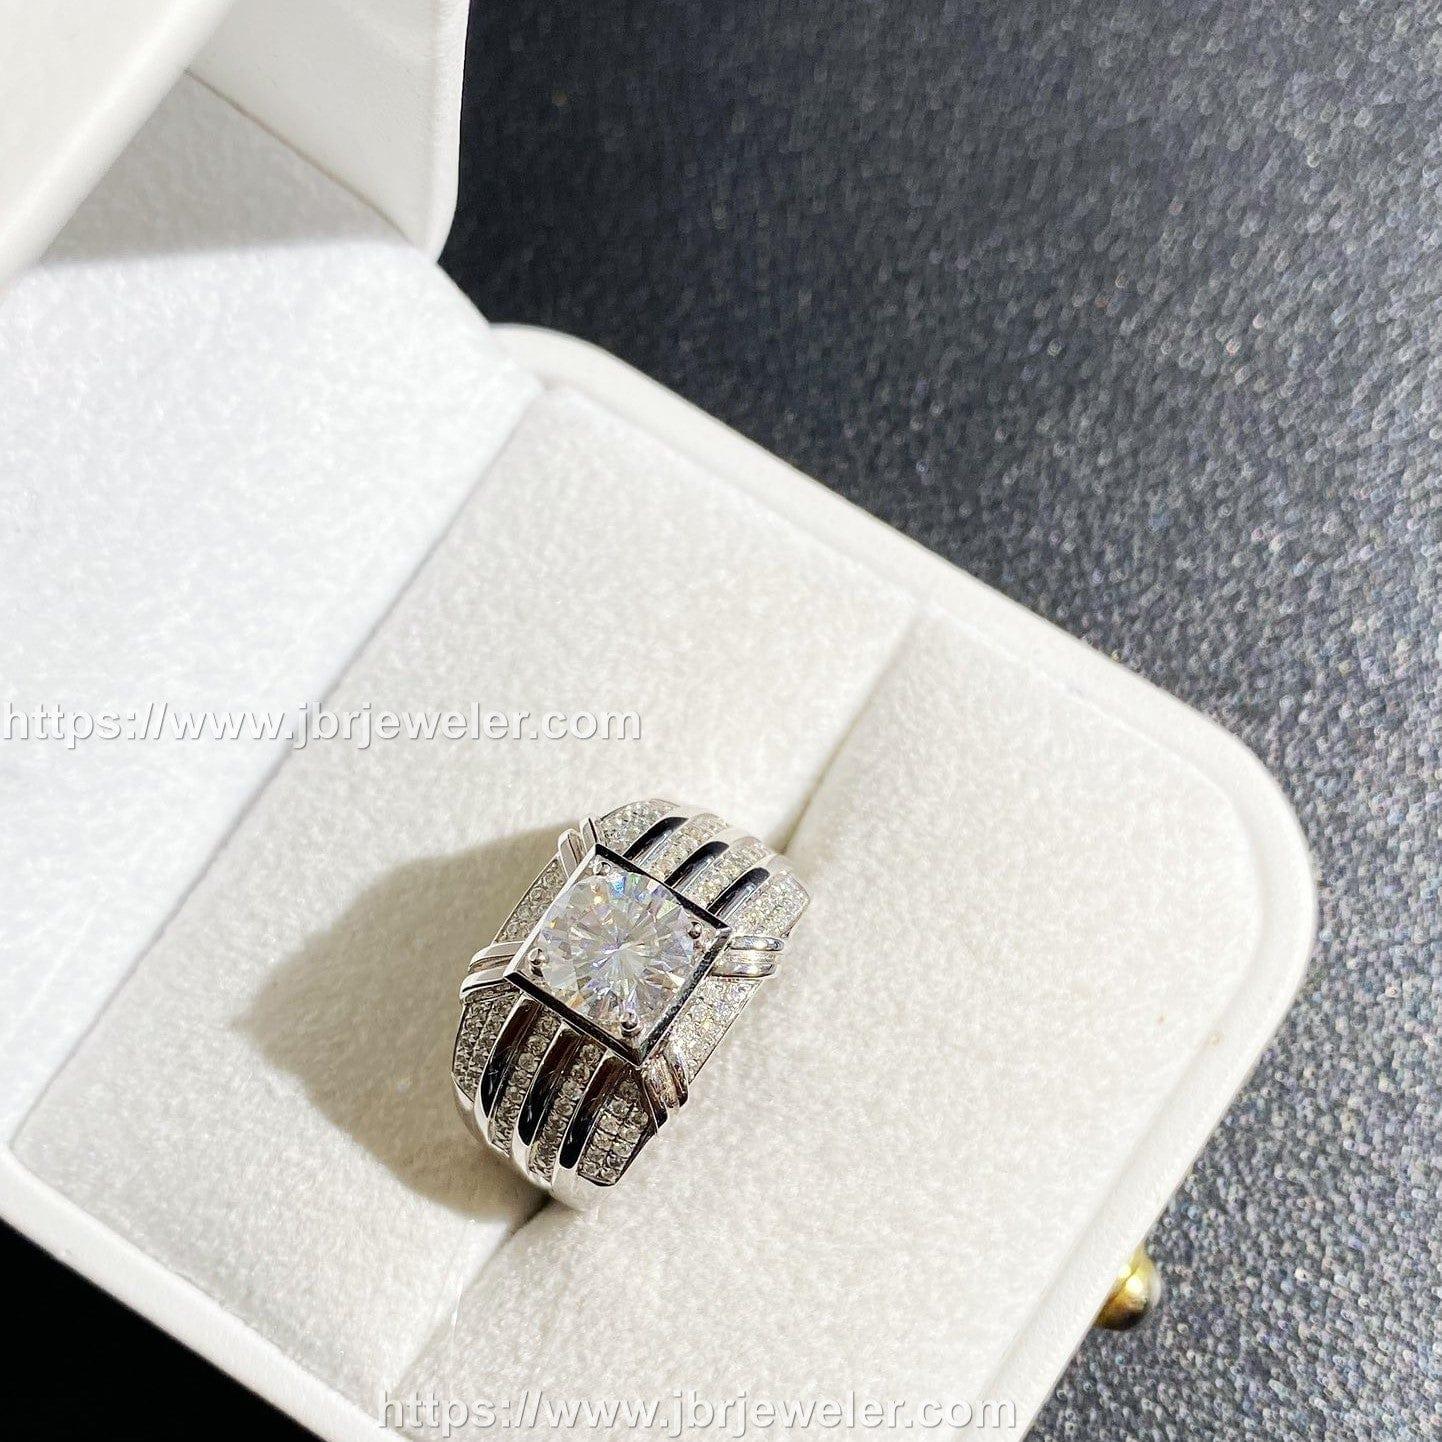 High Quality 1.5ct 7.4mm Round Cut Moissanite Hip Hop 925 Silver White Gold Plated Rings For Men - JBR Jeweler